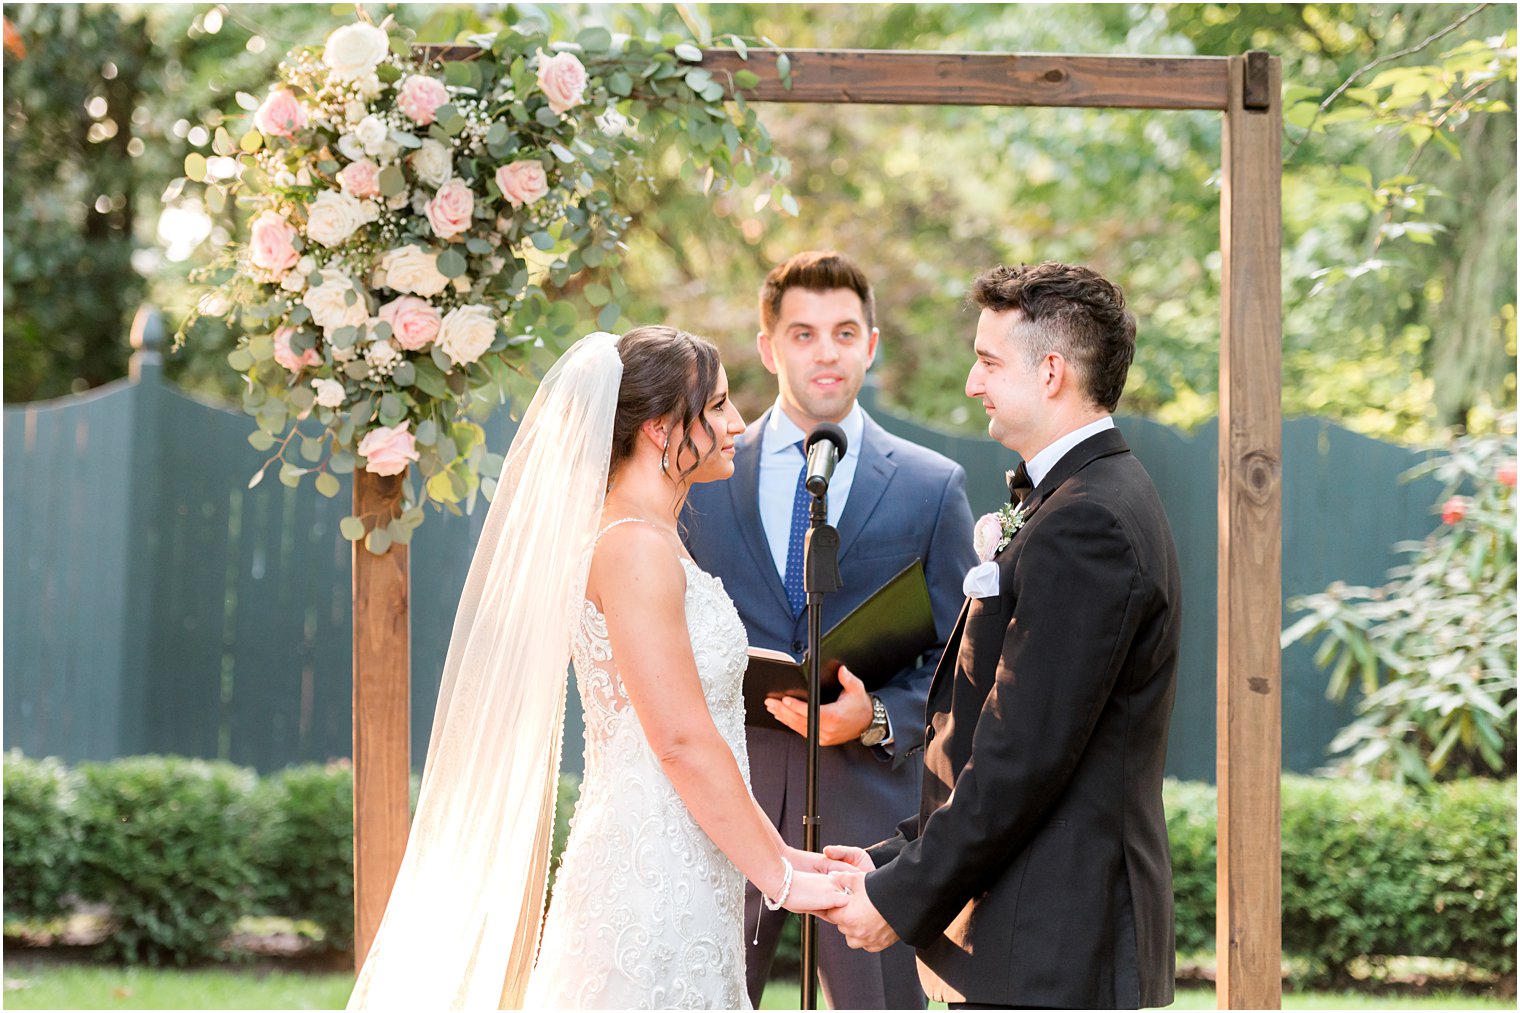 couple exchanges vows during wedding ceremony in garden at The Inn at Fernbrook Farms